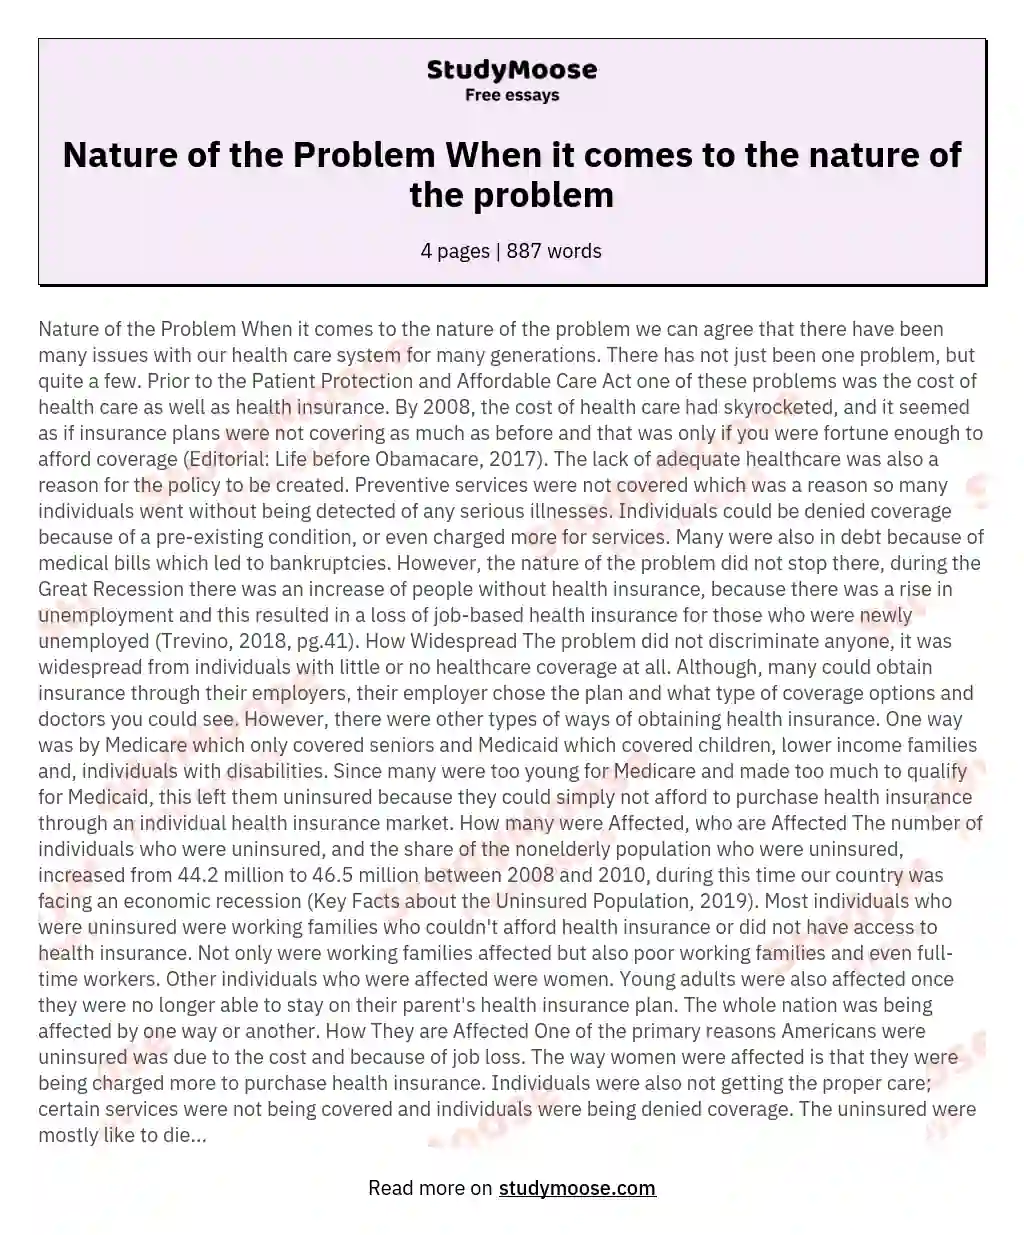 Nature of the Problem When it comes to the nature of the problem essay